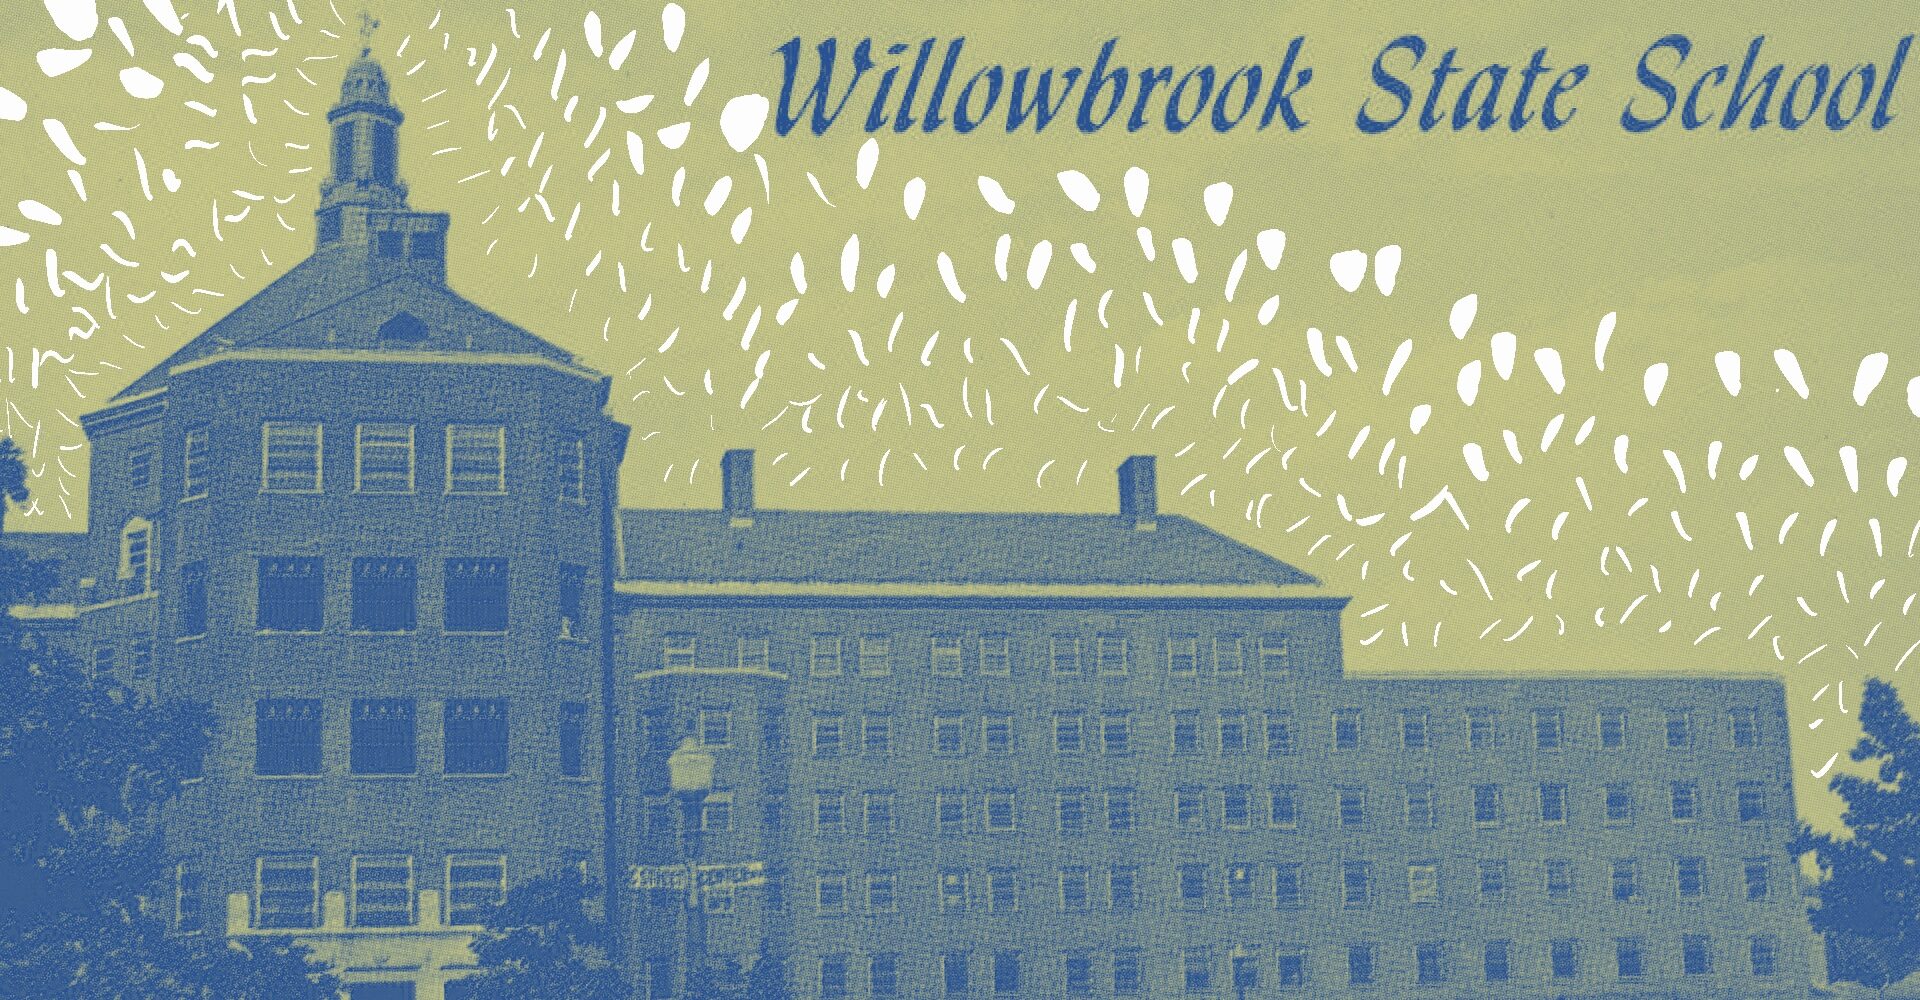 Willowbrook State School Post Card